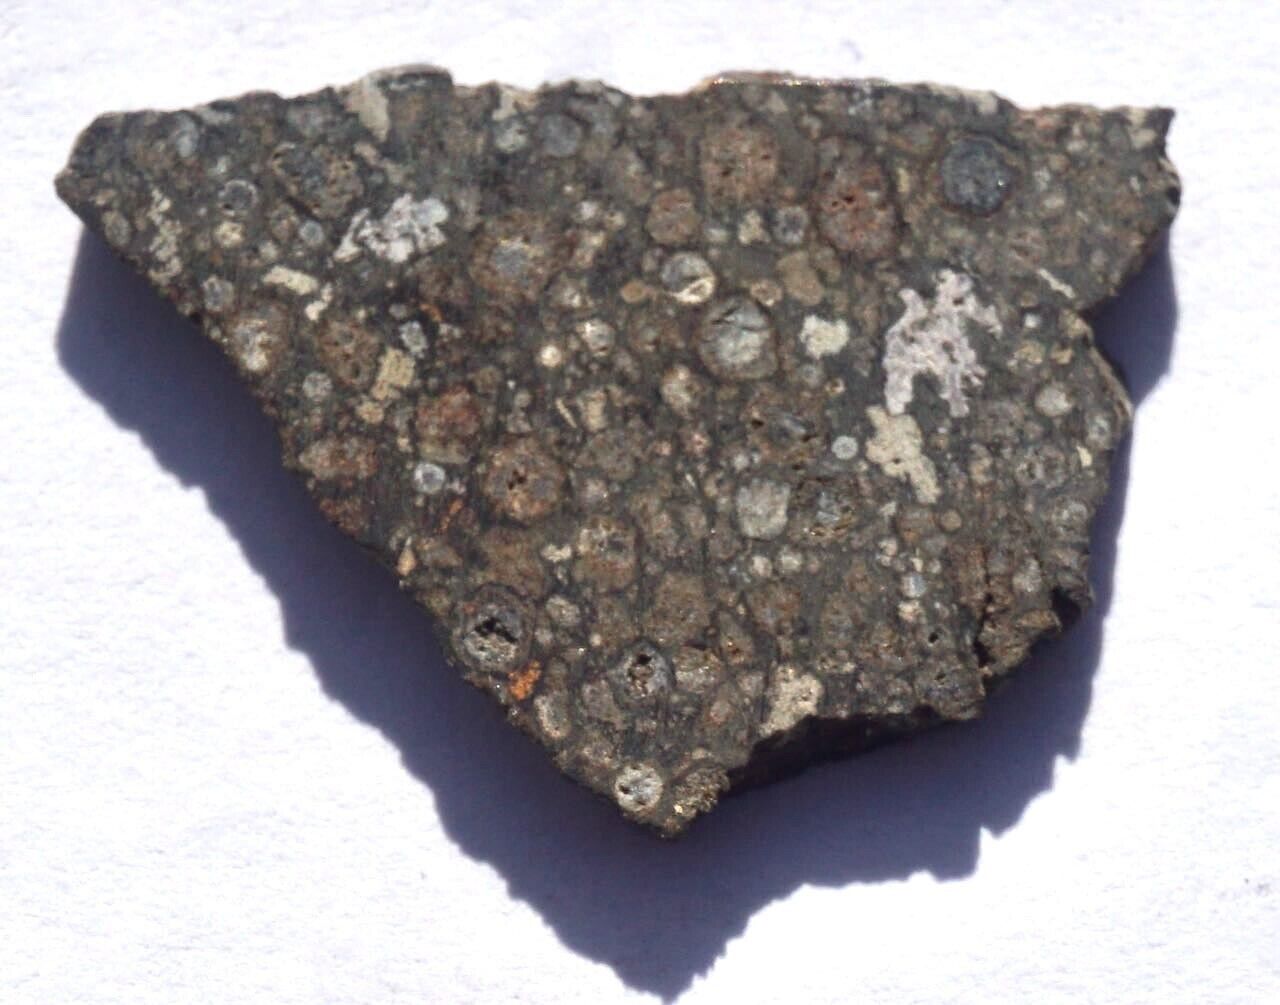 OLDEST SOLID MATTER EVER DISCOVERED IN OUR SOLAR SYSTEM METEORITE NWA 2364